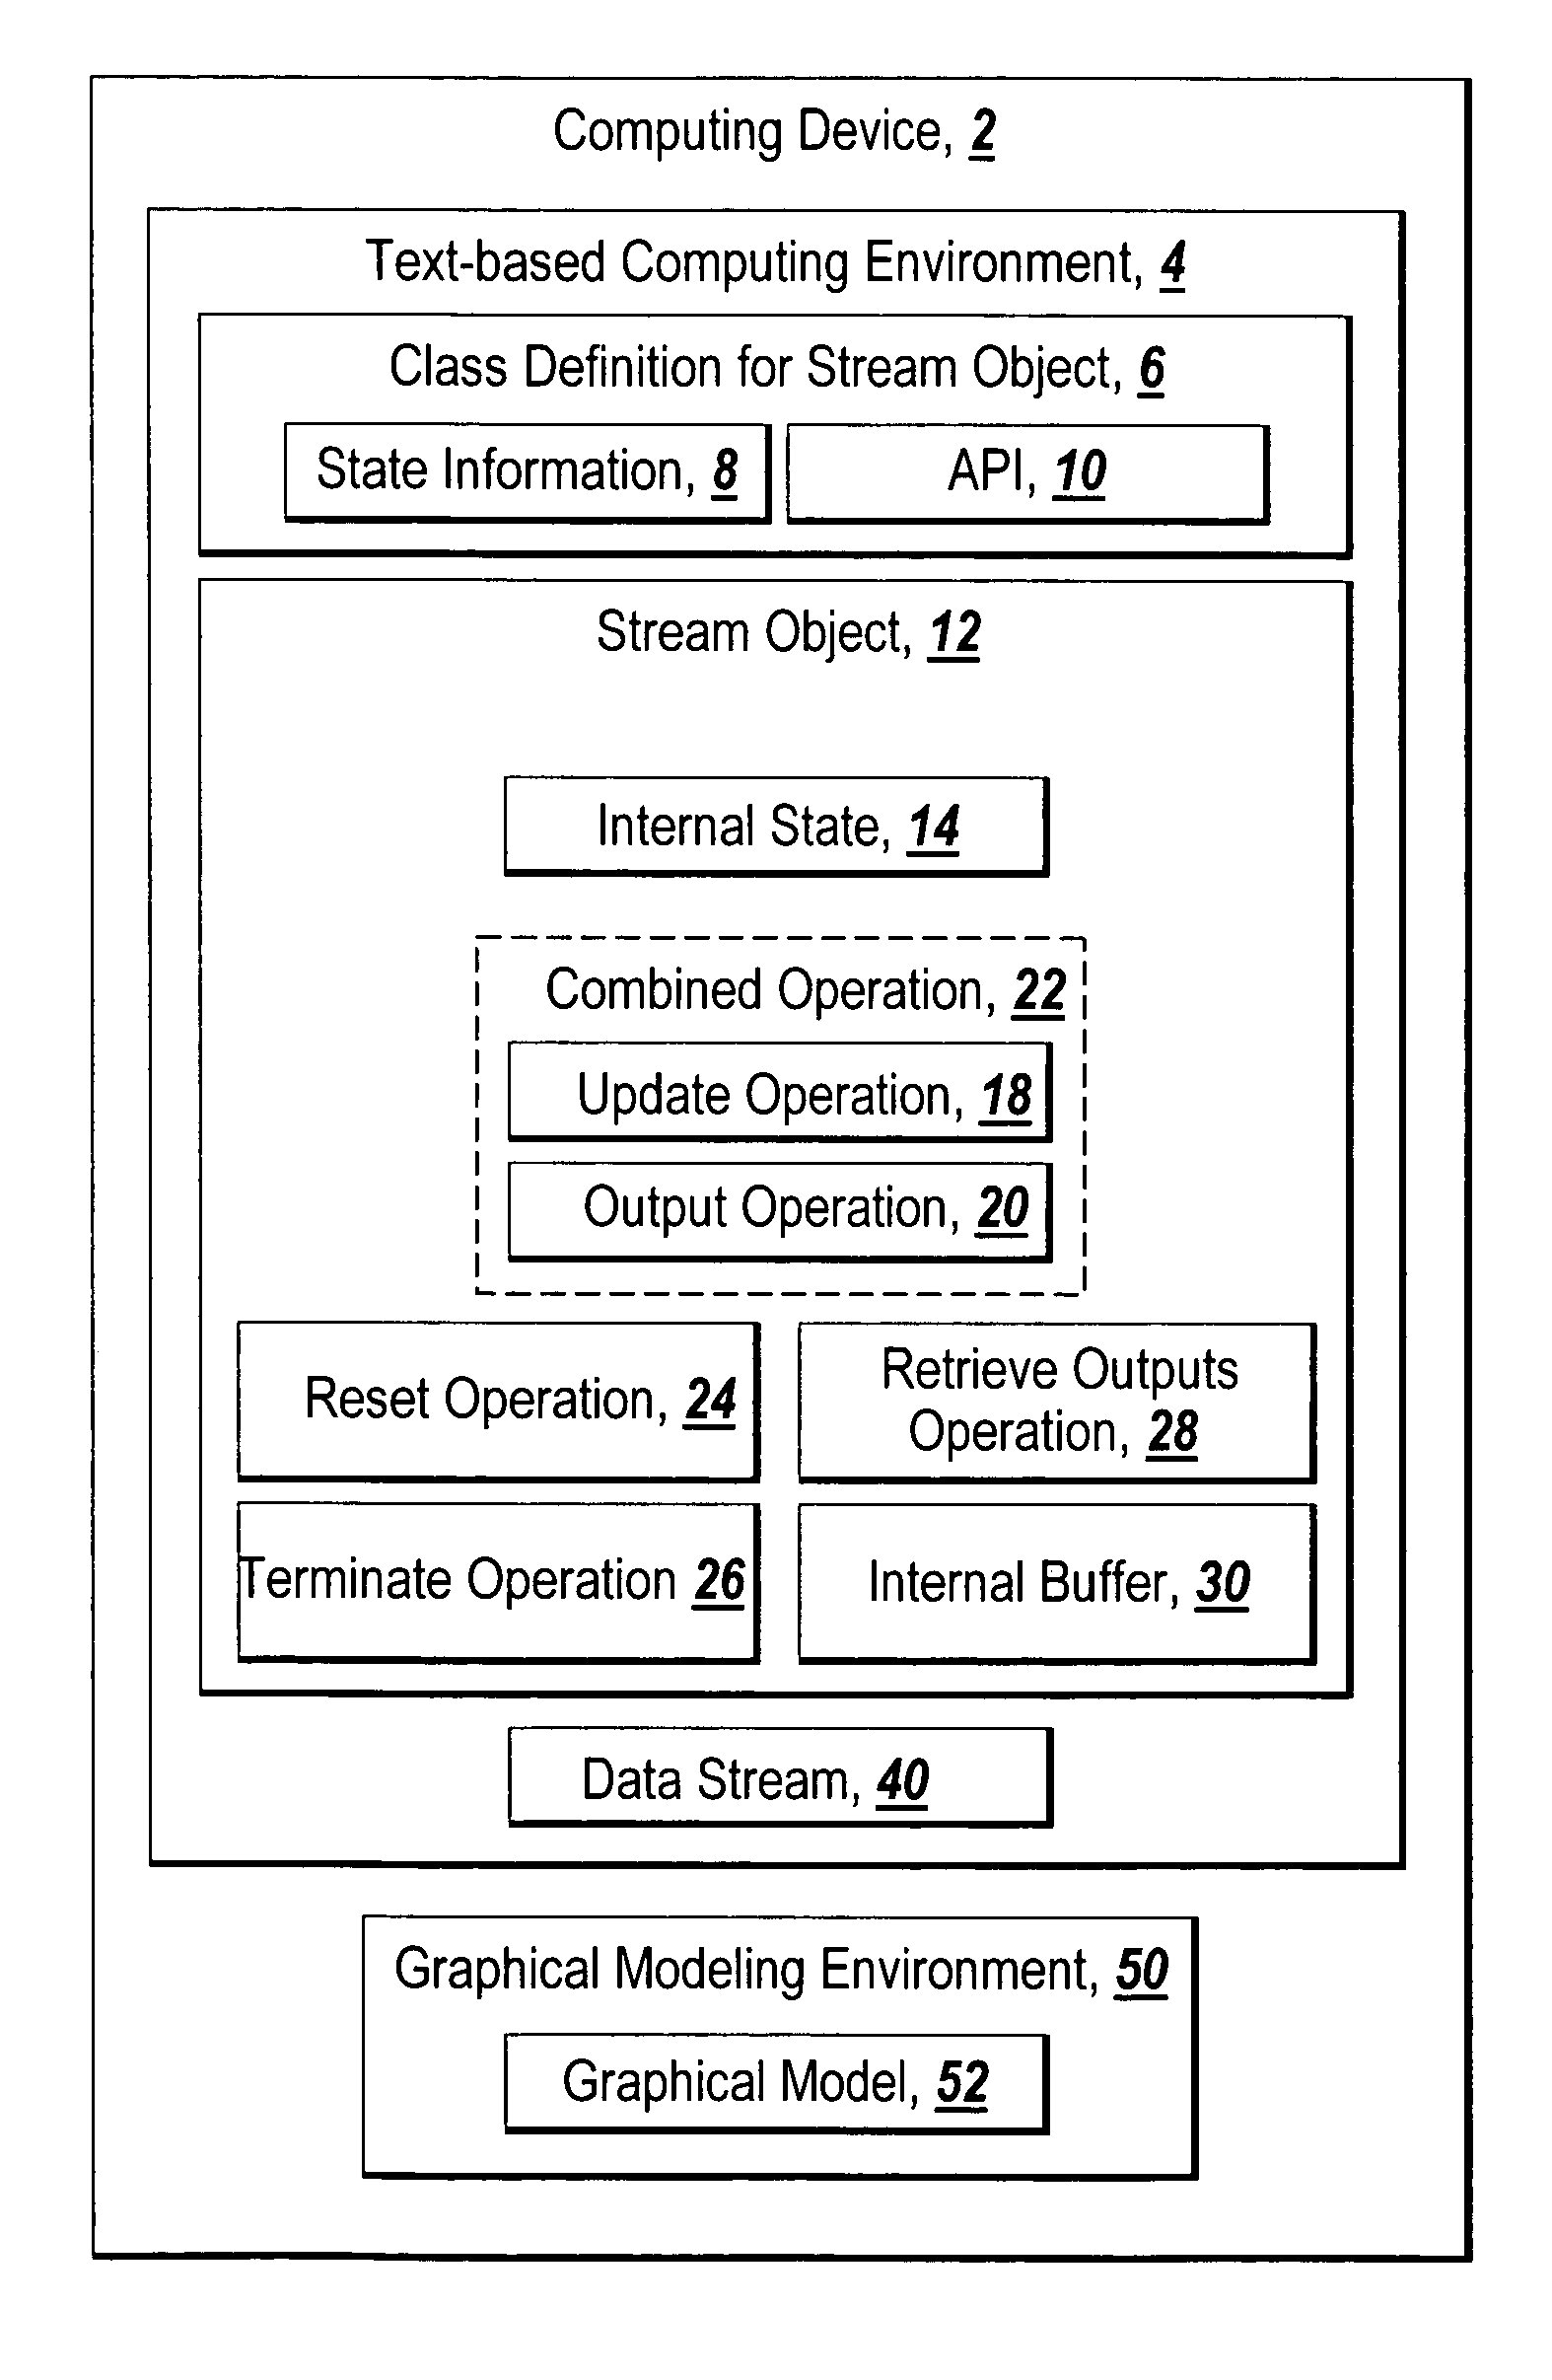 System and method for using stream objects to perform stream processing in a text-based computing environment